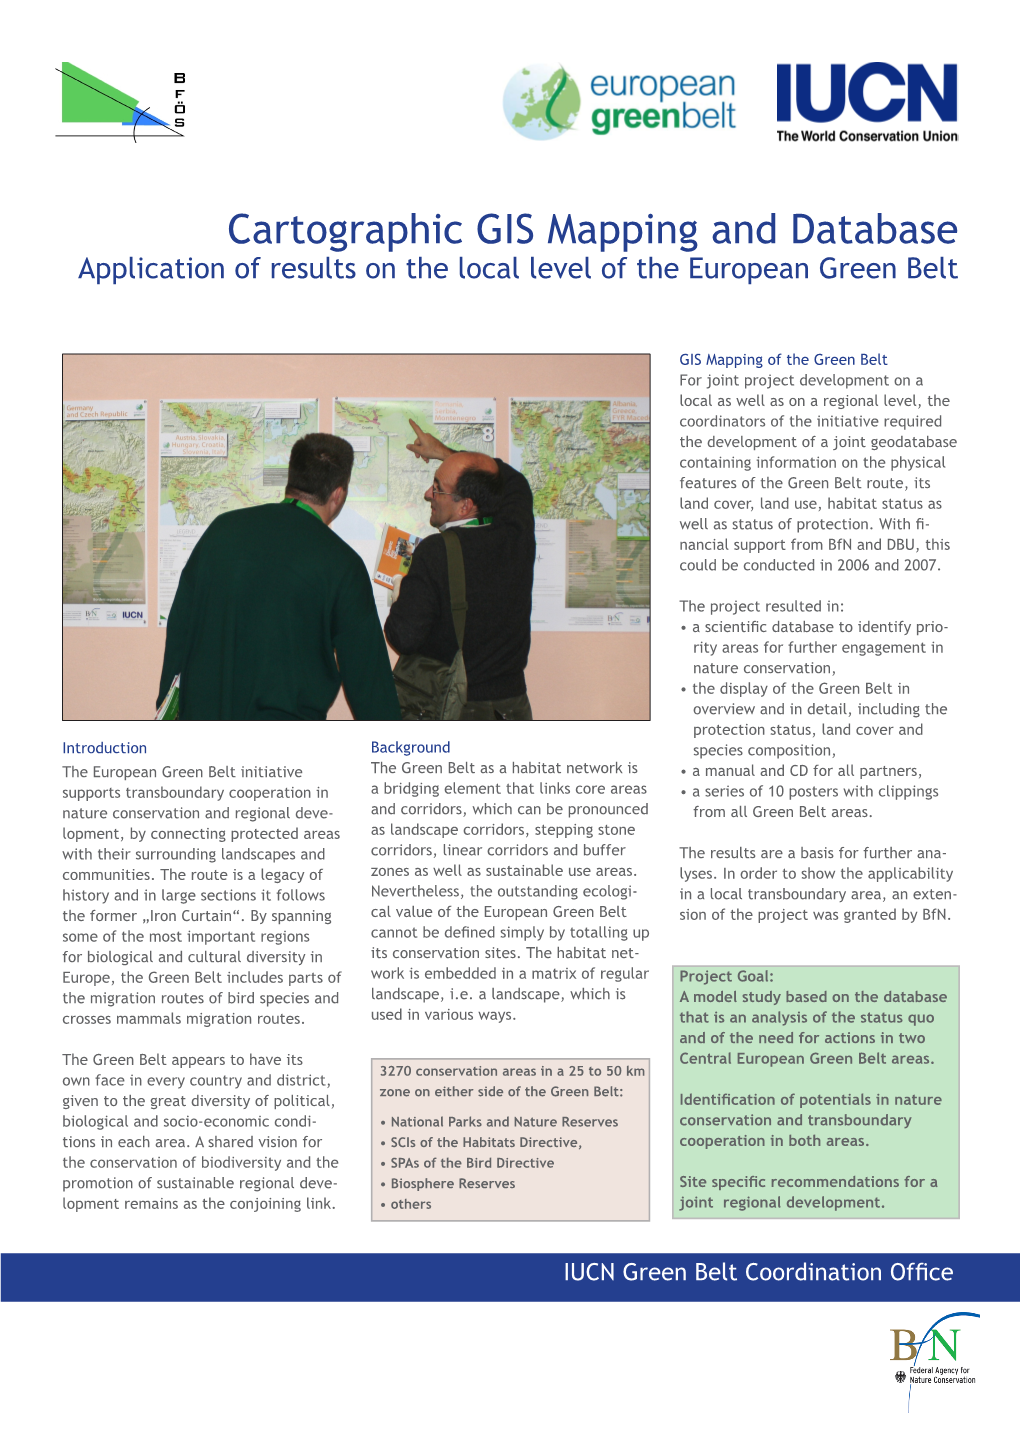 Cartographic GIS Mapping and Database Application of Results on the Local Level of the European Green Belt